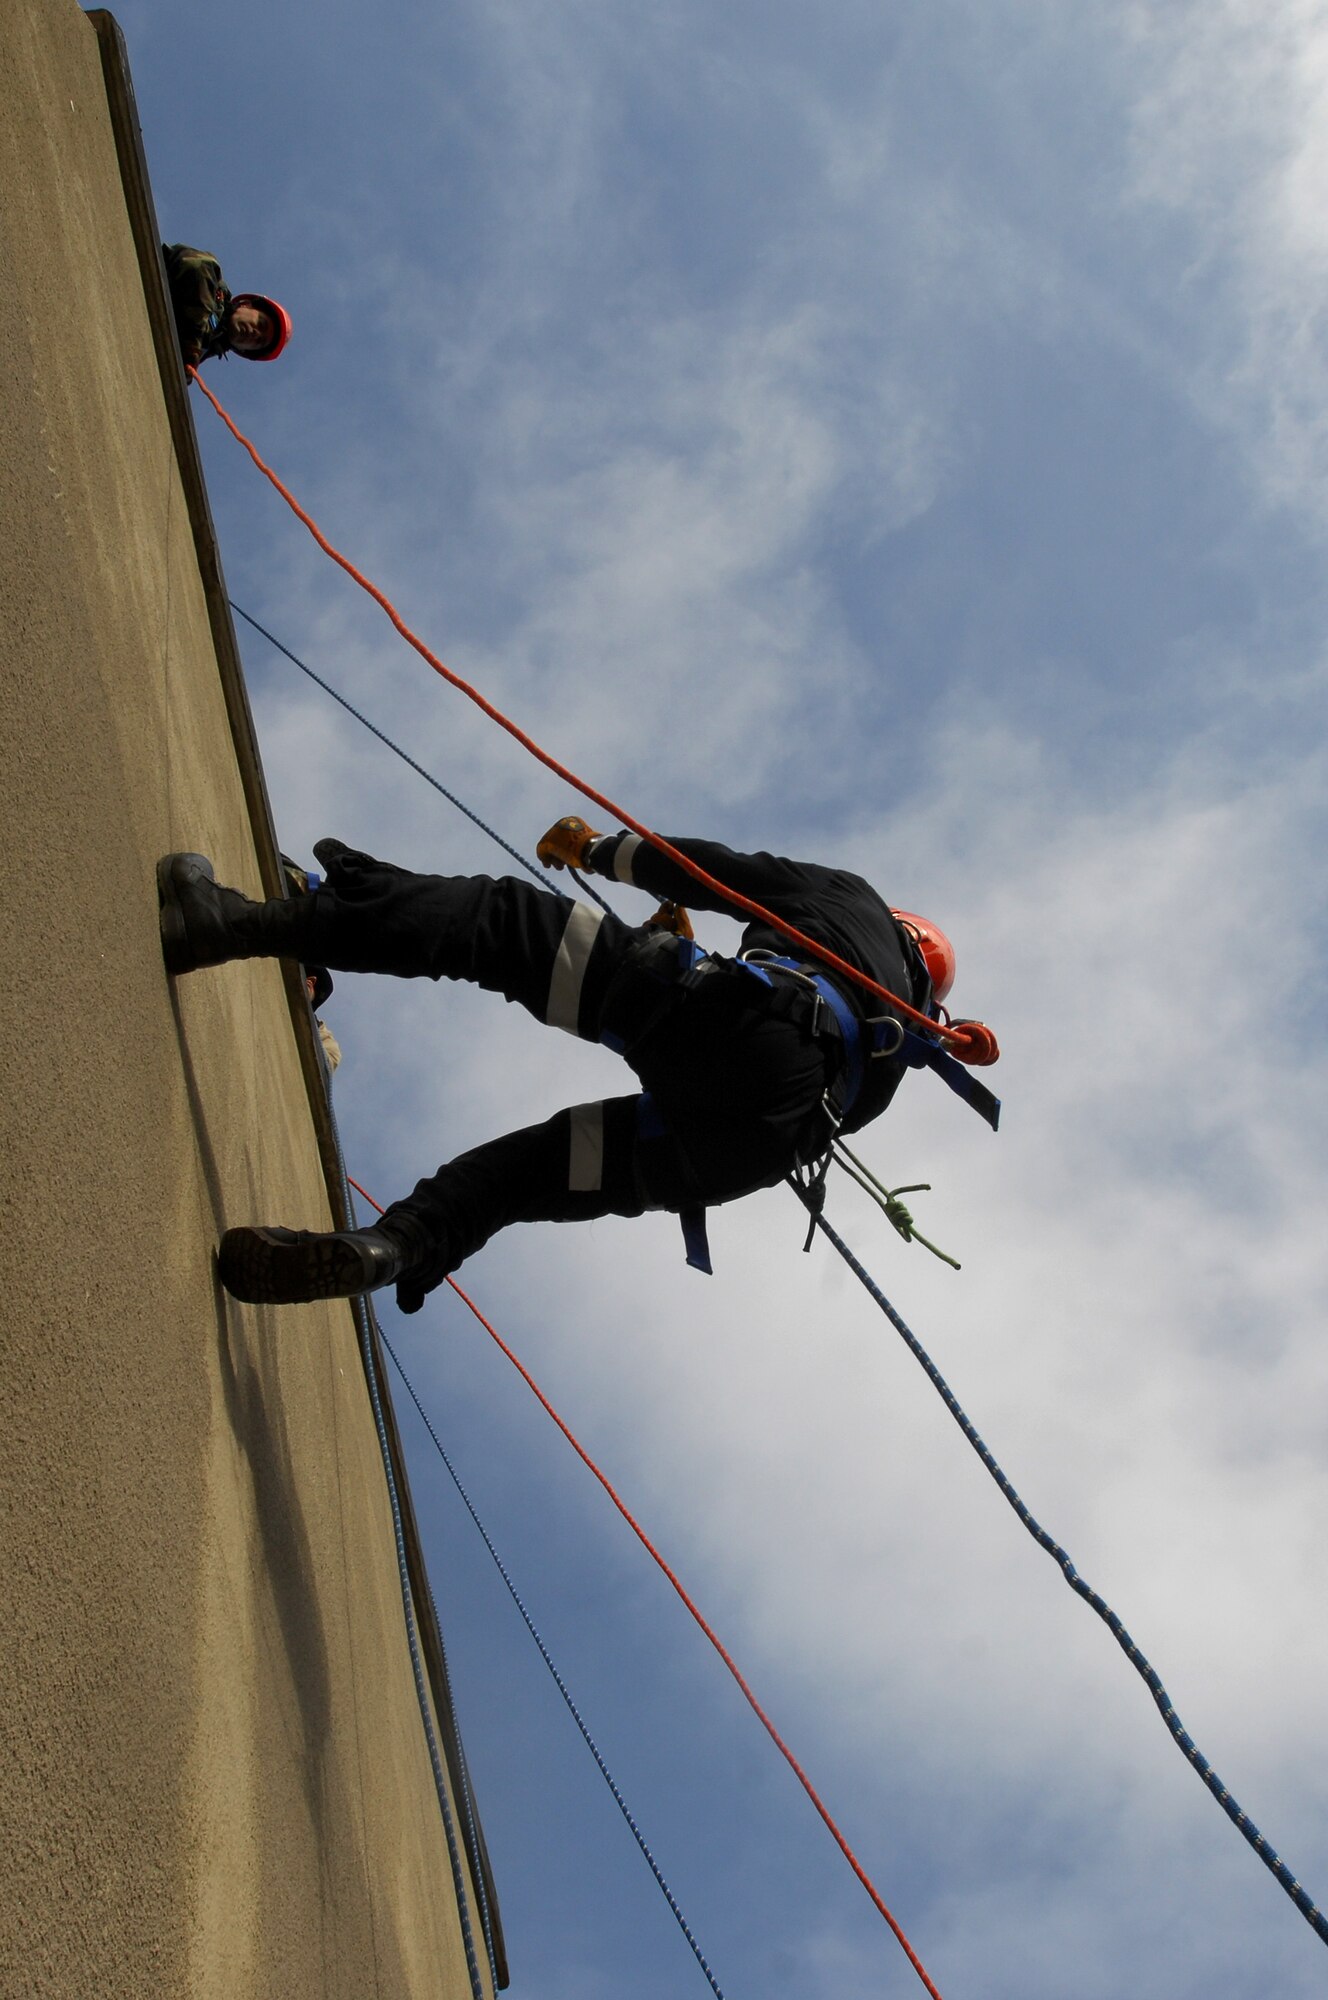 A U.S. Air Forces in Europe firefighter participates in rappelling training Feb. 3, 2009, at Ramstein Air Base. Several firefighters from all over USAFE gathered to participate in an extensive two-week training course. (U.S. Air Force photo by Airman 1st Class Kenny Holston)